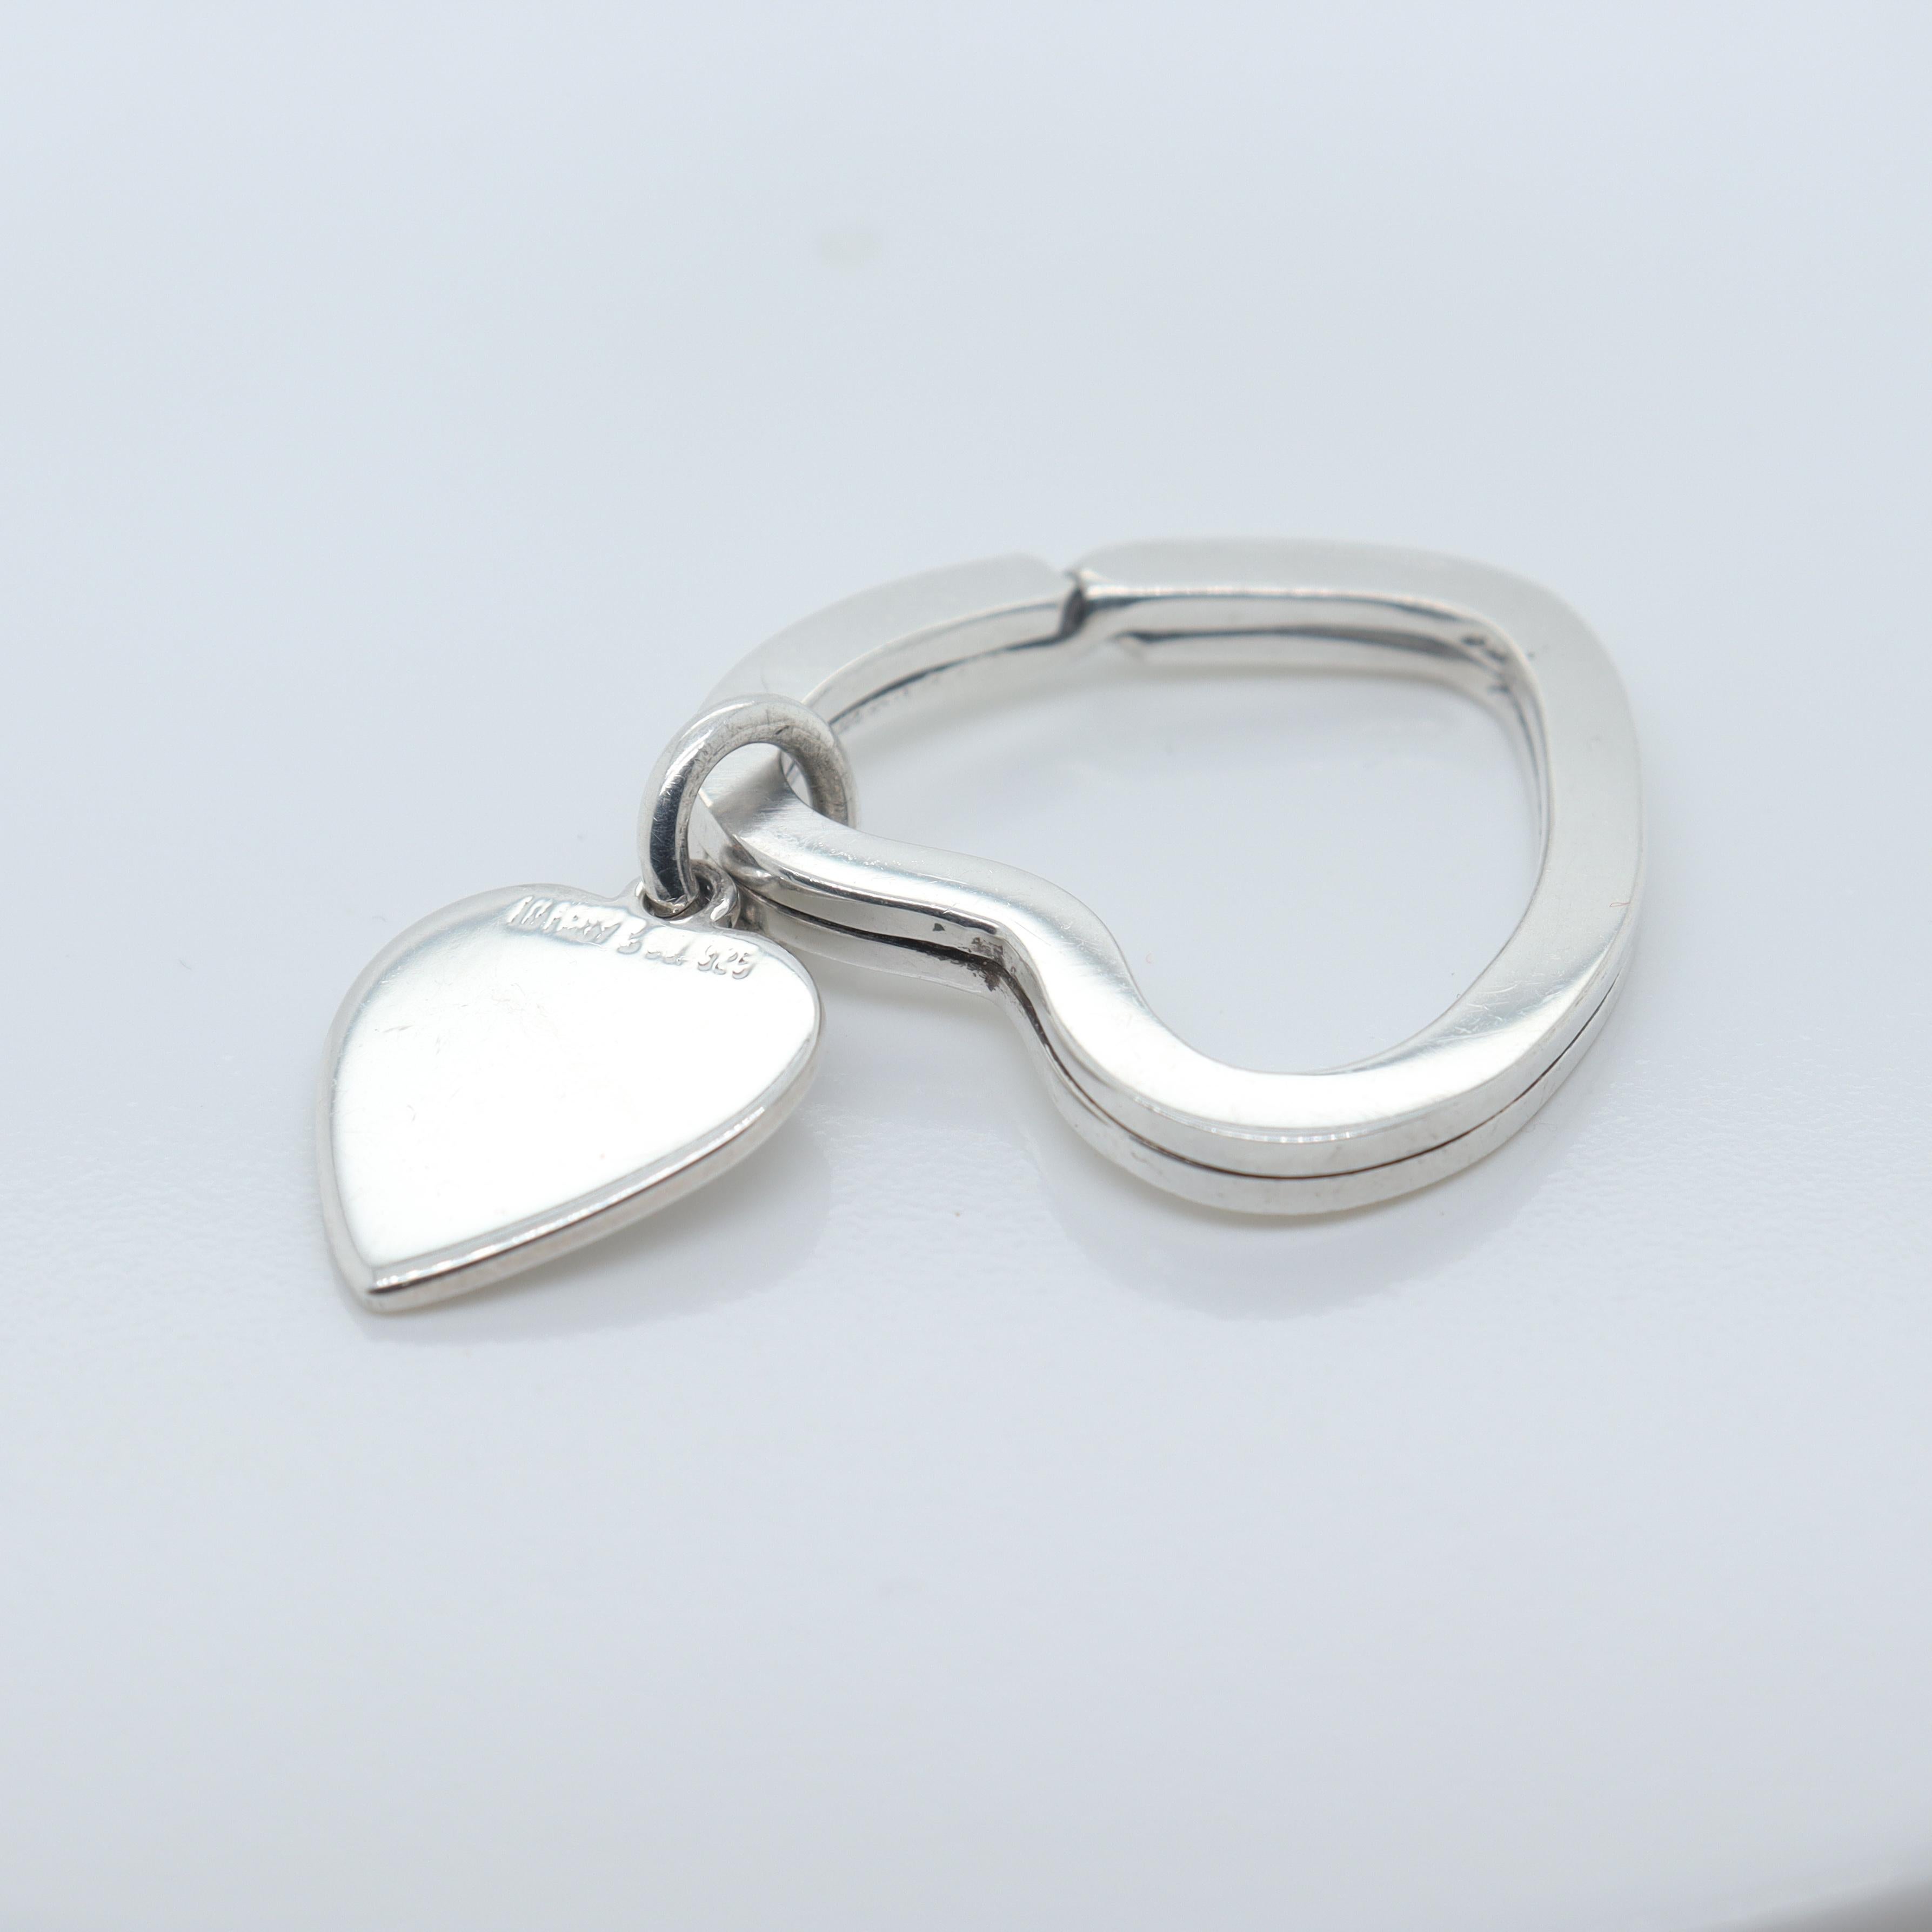 Modern Tiffany & Co. Sterling Silver Heart Shaped Key Holder or Ring For Sale